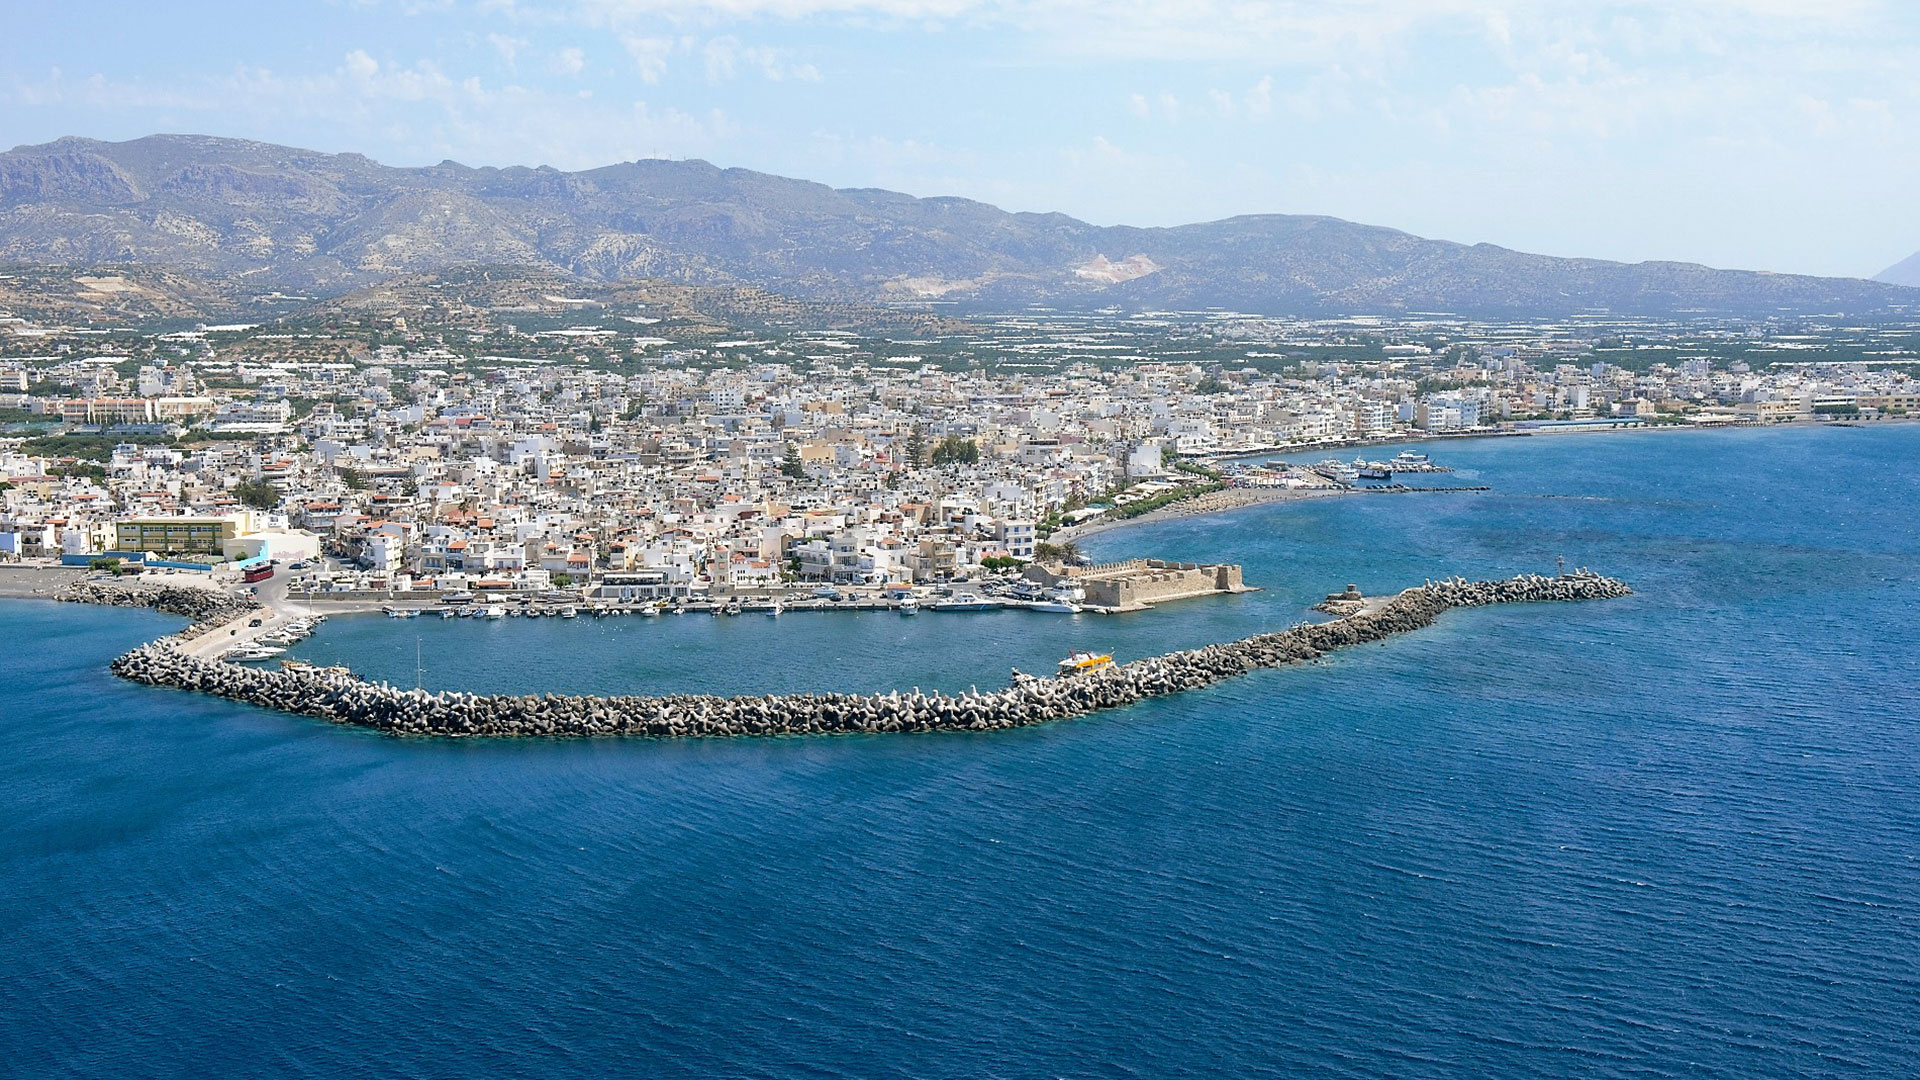 EXPERIENCE HISTORY CULTURE & NATURE OF IERAPETRA